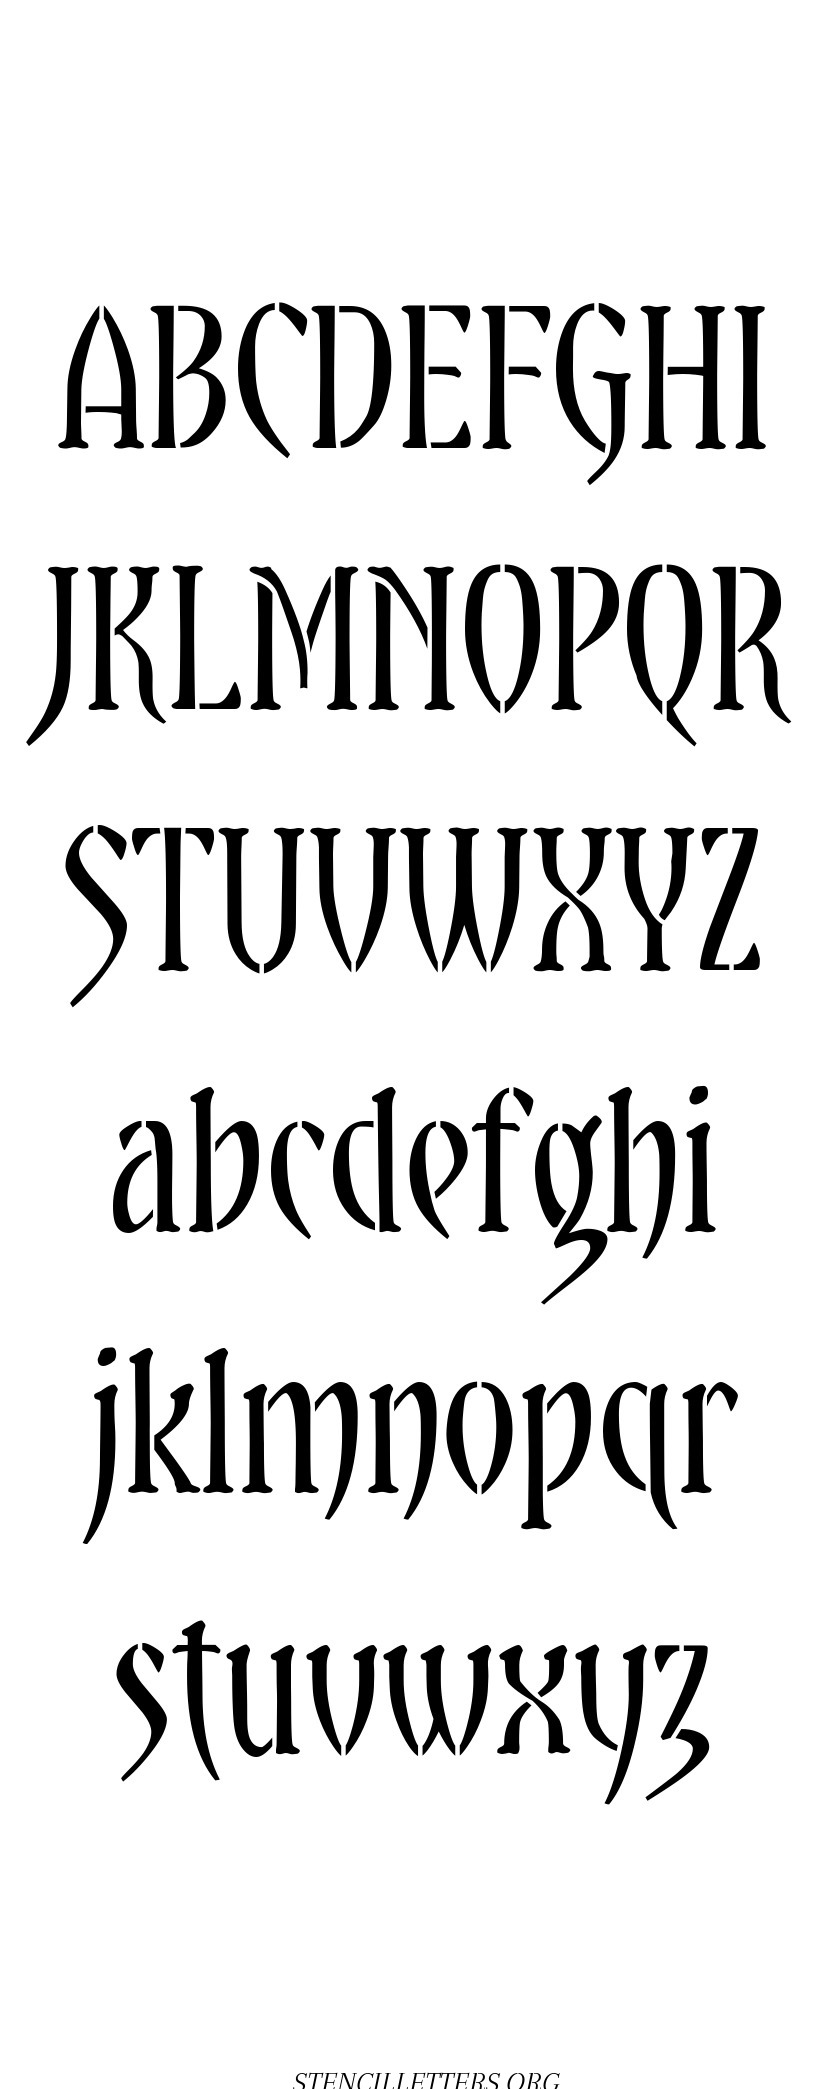 Gothic Lettering free printable letter stencils